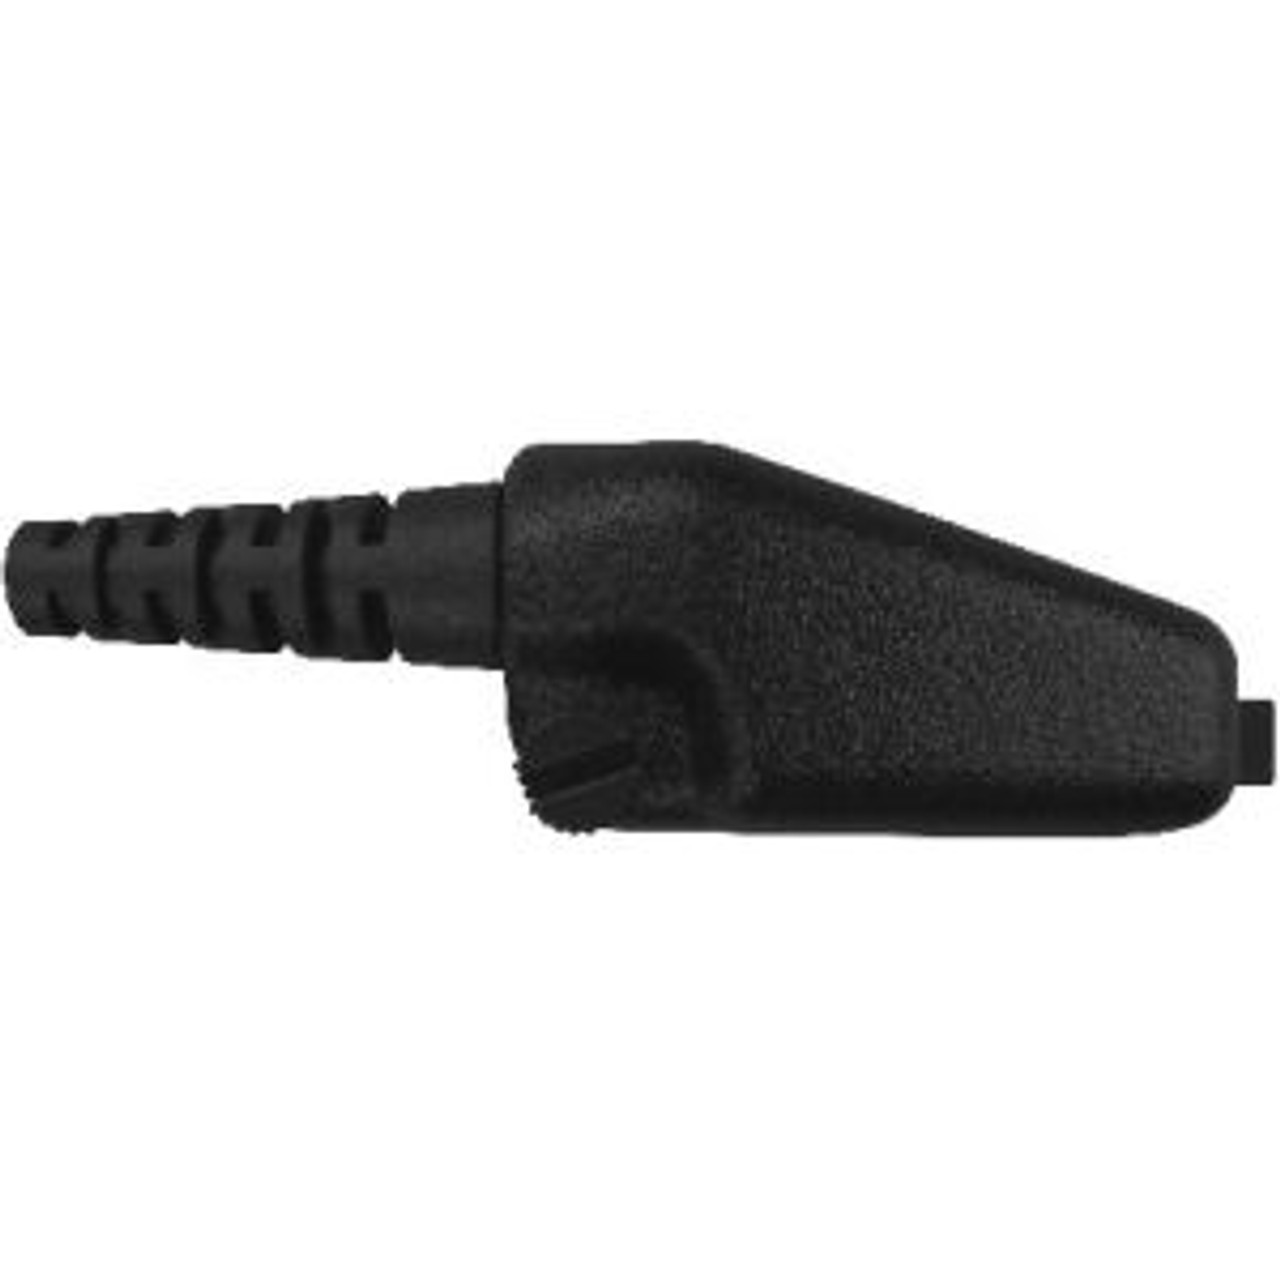 Kenwood TK-290 Throat Mic With Standard And Finger PTT